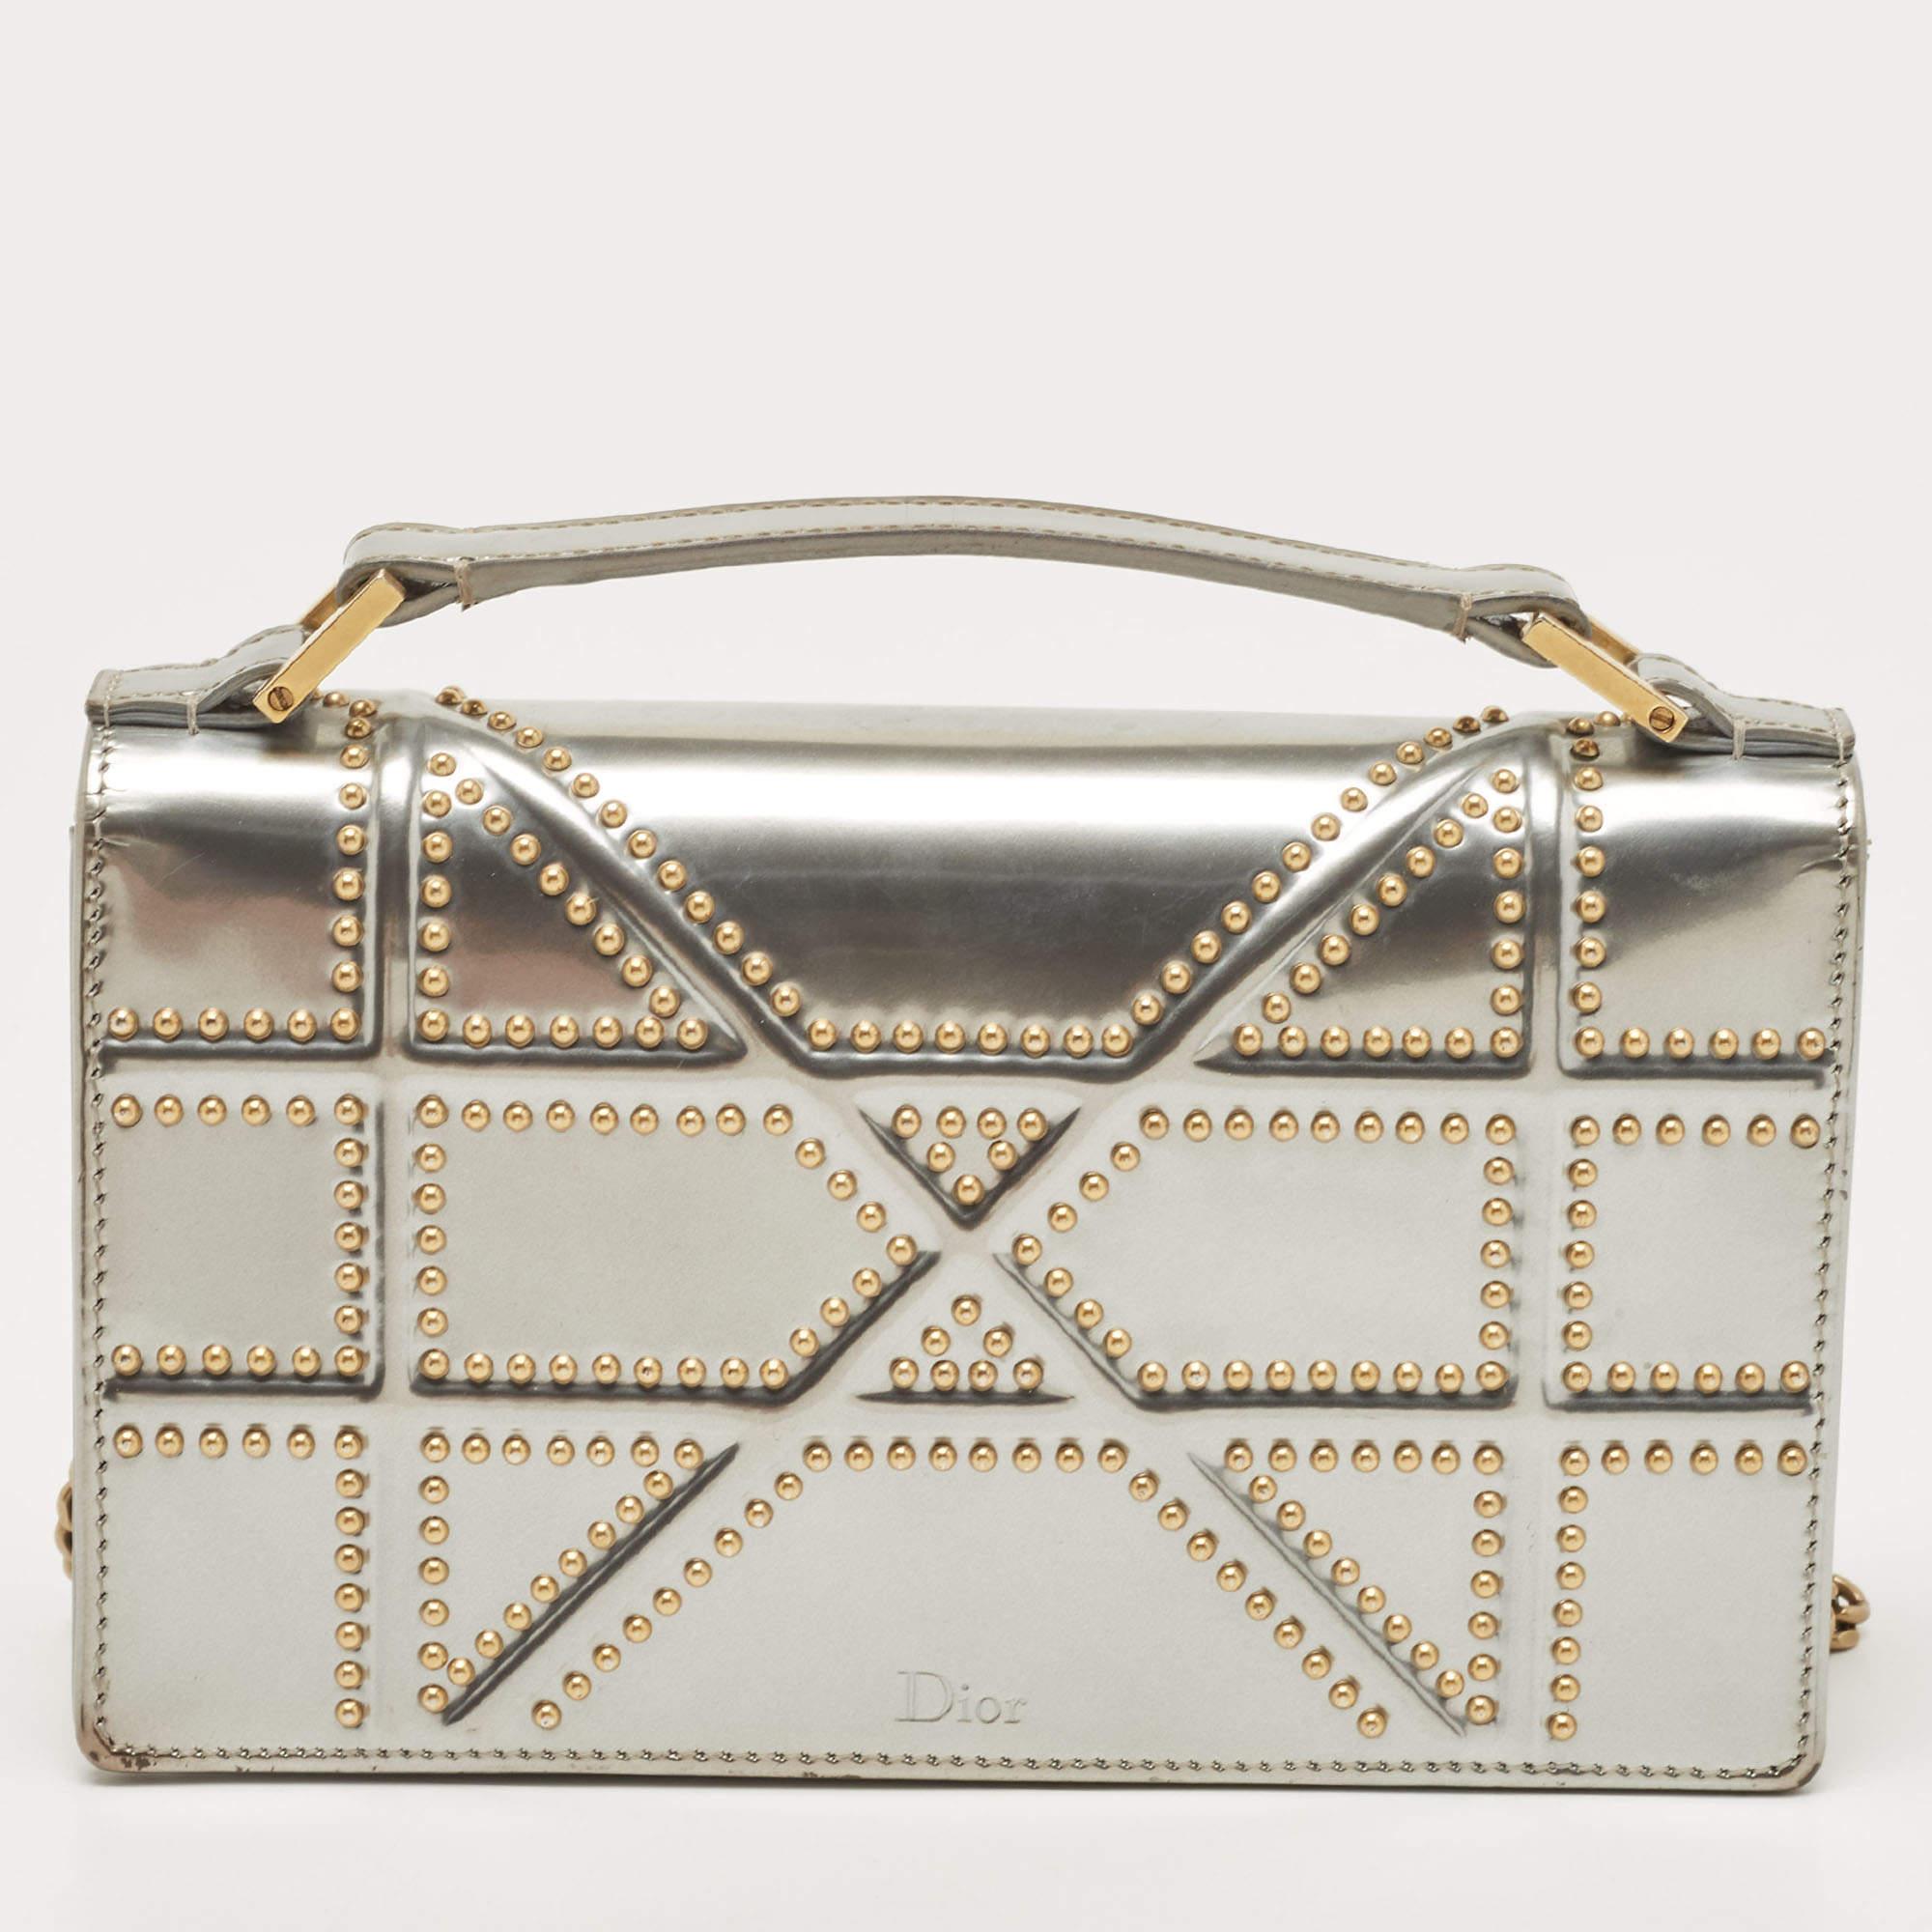 Trust this Dior Diorama bag to be light, durable, and comfortable to carry. It is crafted beautifully using the best materials to be a durable style ally.

Includes:  Original Dustbag, Detachable chain

